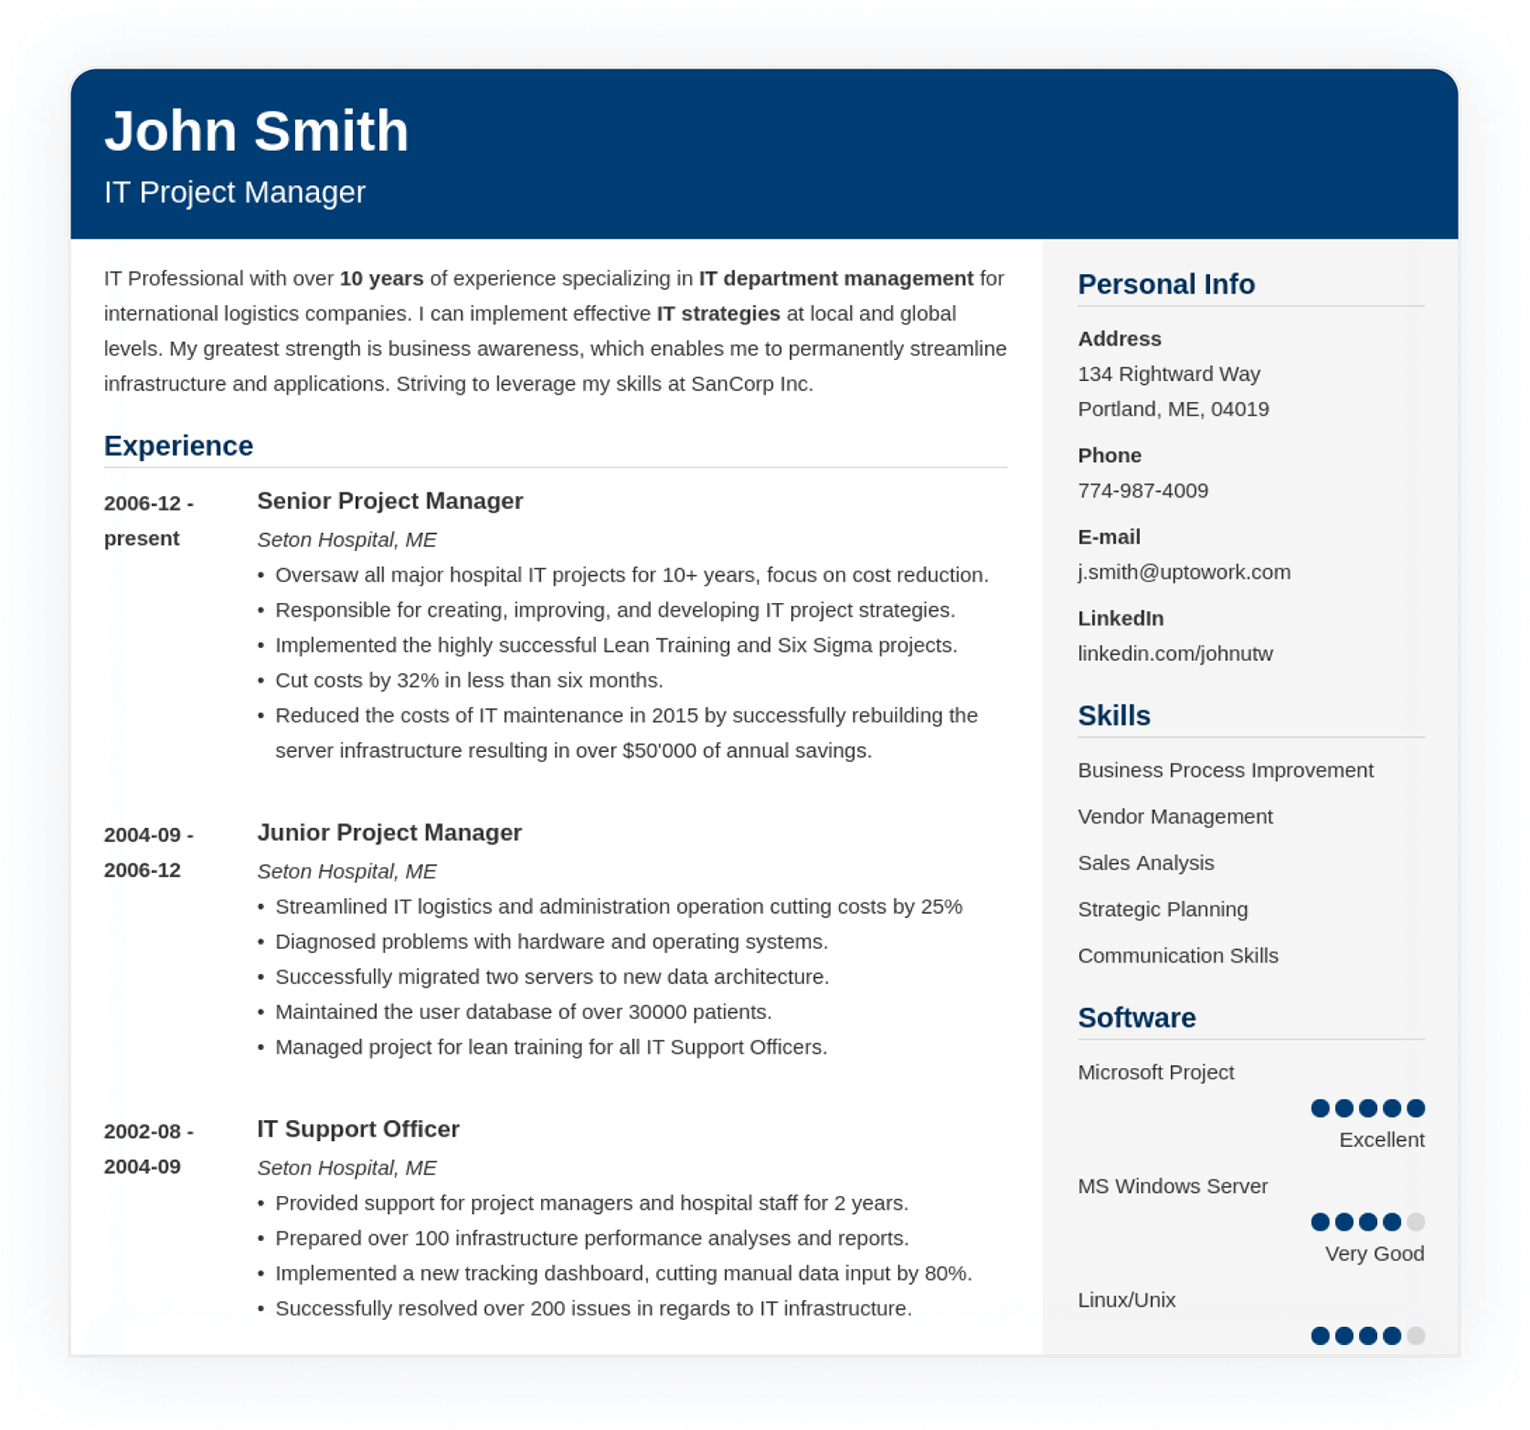 resume Gets A Redesign